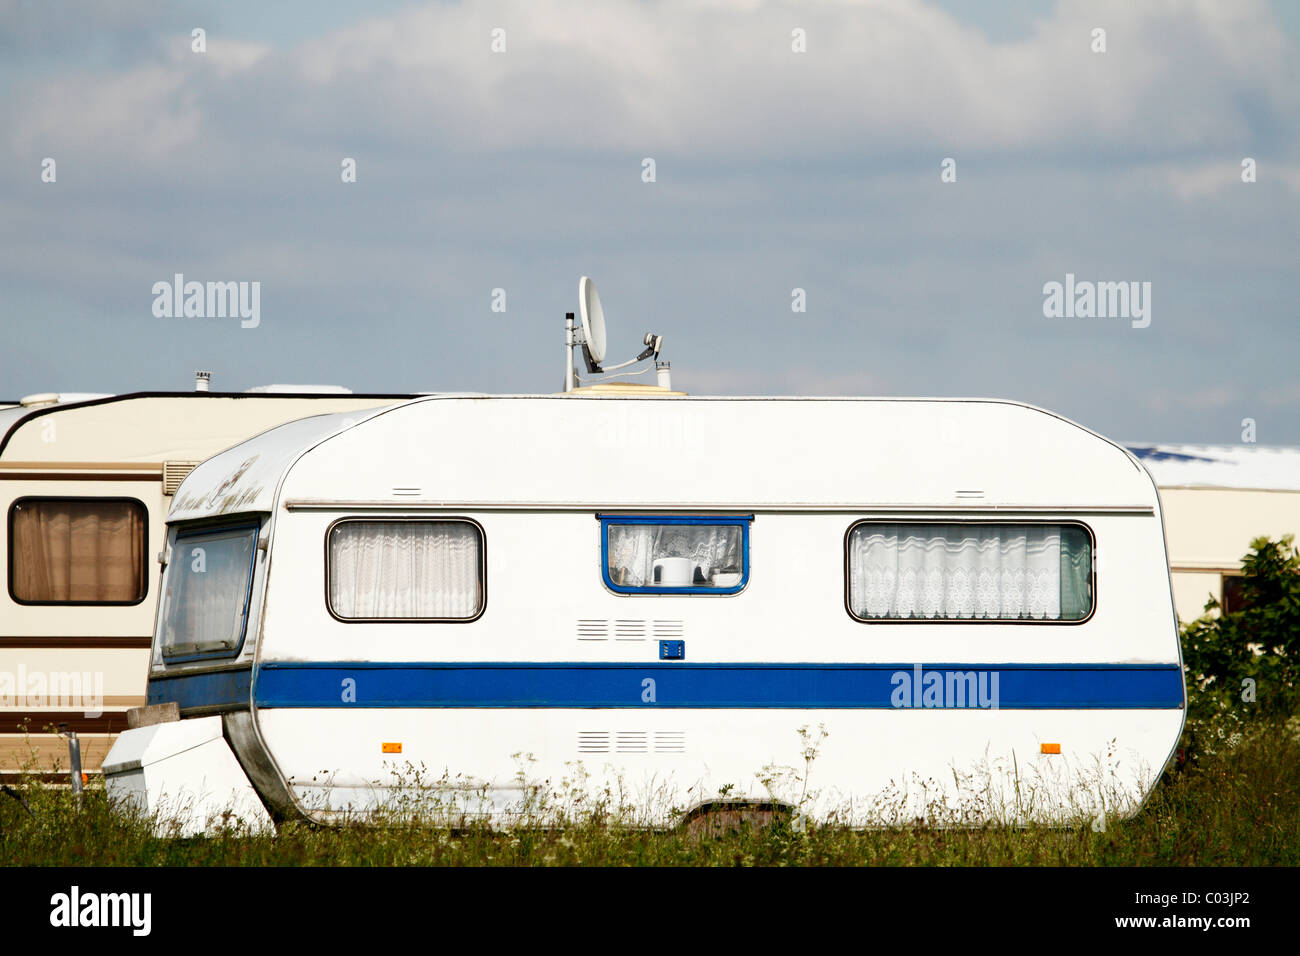 Caravan On A Meadow High Resolution Stock Photography and Images - Alamy